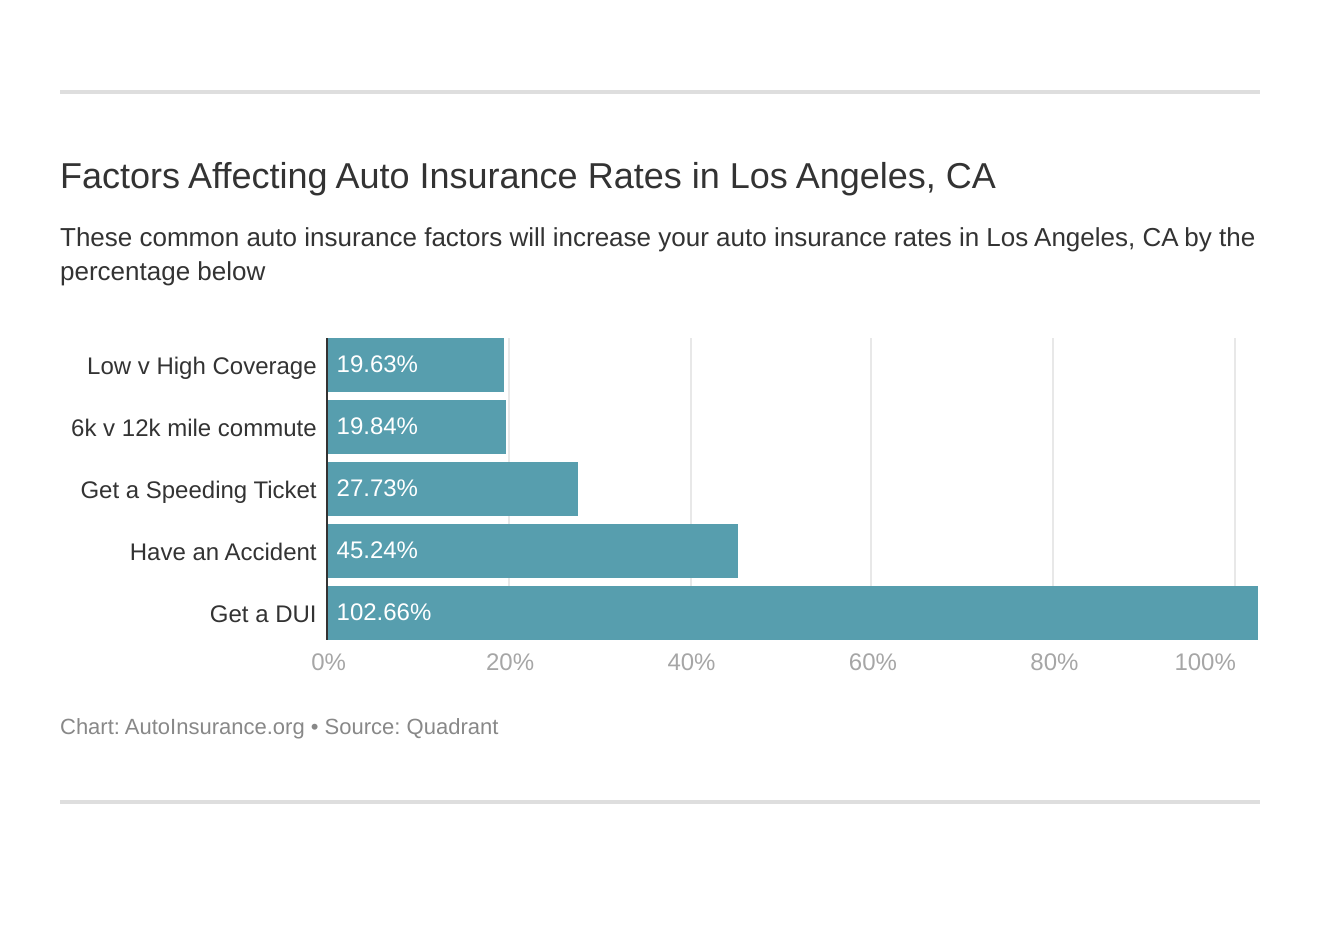 Factors Affecting Auto Insurance Rates in Los Angeles, CA